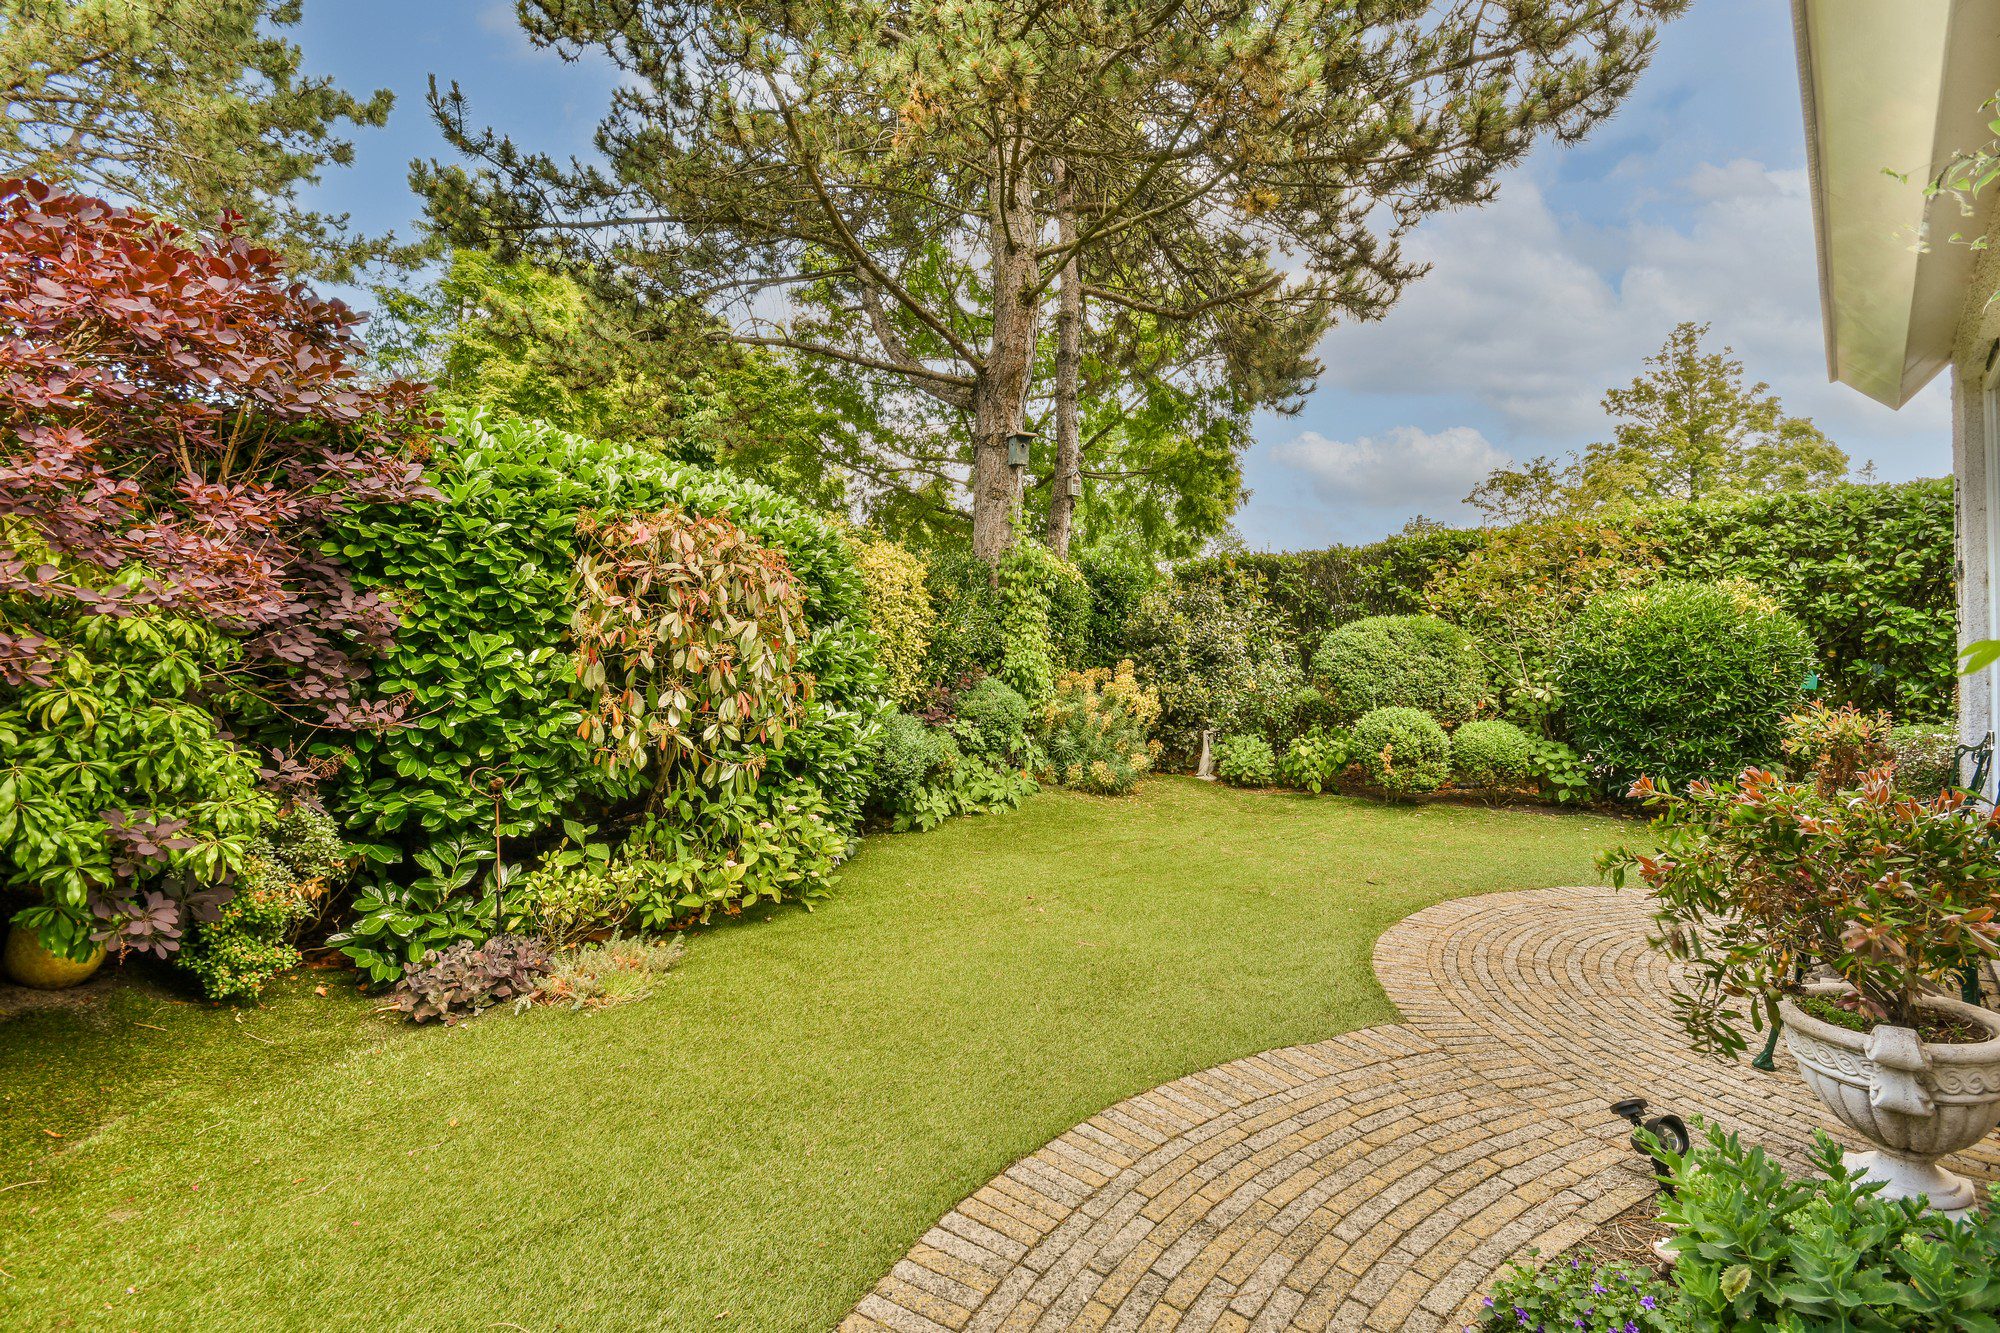 The image shows a well-manicured garden with a variety of plants. In the garden, there are shrubs and trees of different shapes, sizes, and colours, providing a diverse and lush landscape. The garden features a neatly trimmed lawn with a curved brick pathway leading through it, indicating careful maintenance. Surrounded by hedges and greenery, the garden presents a private and serene outdoor space. Additionally, there's a part of a building visible to the right side of the image with what appears to be a patio or covered area, which suggests this garden is part of a residential property. The sky is partly cloudy, indicating fair weather, and the lighting suggests it might be daytime. The overall impression is of an inviting and peaceful garden setting.